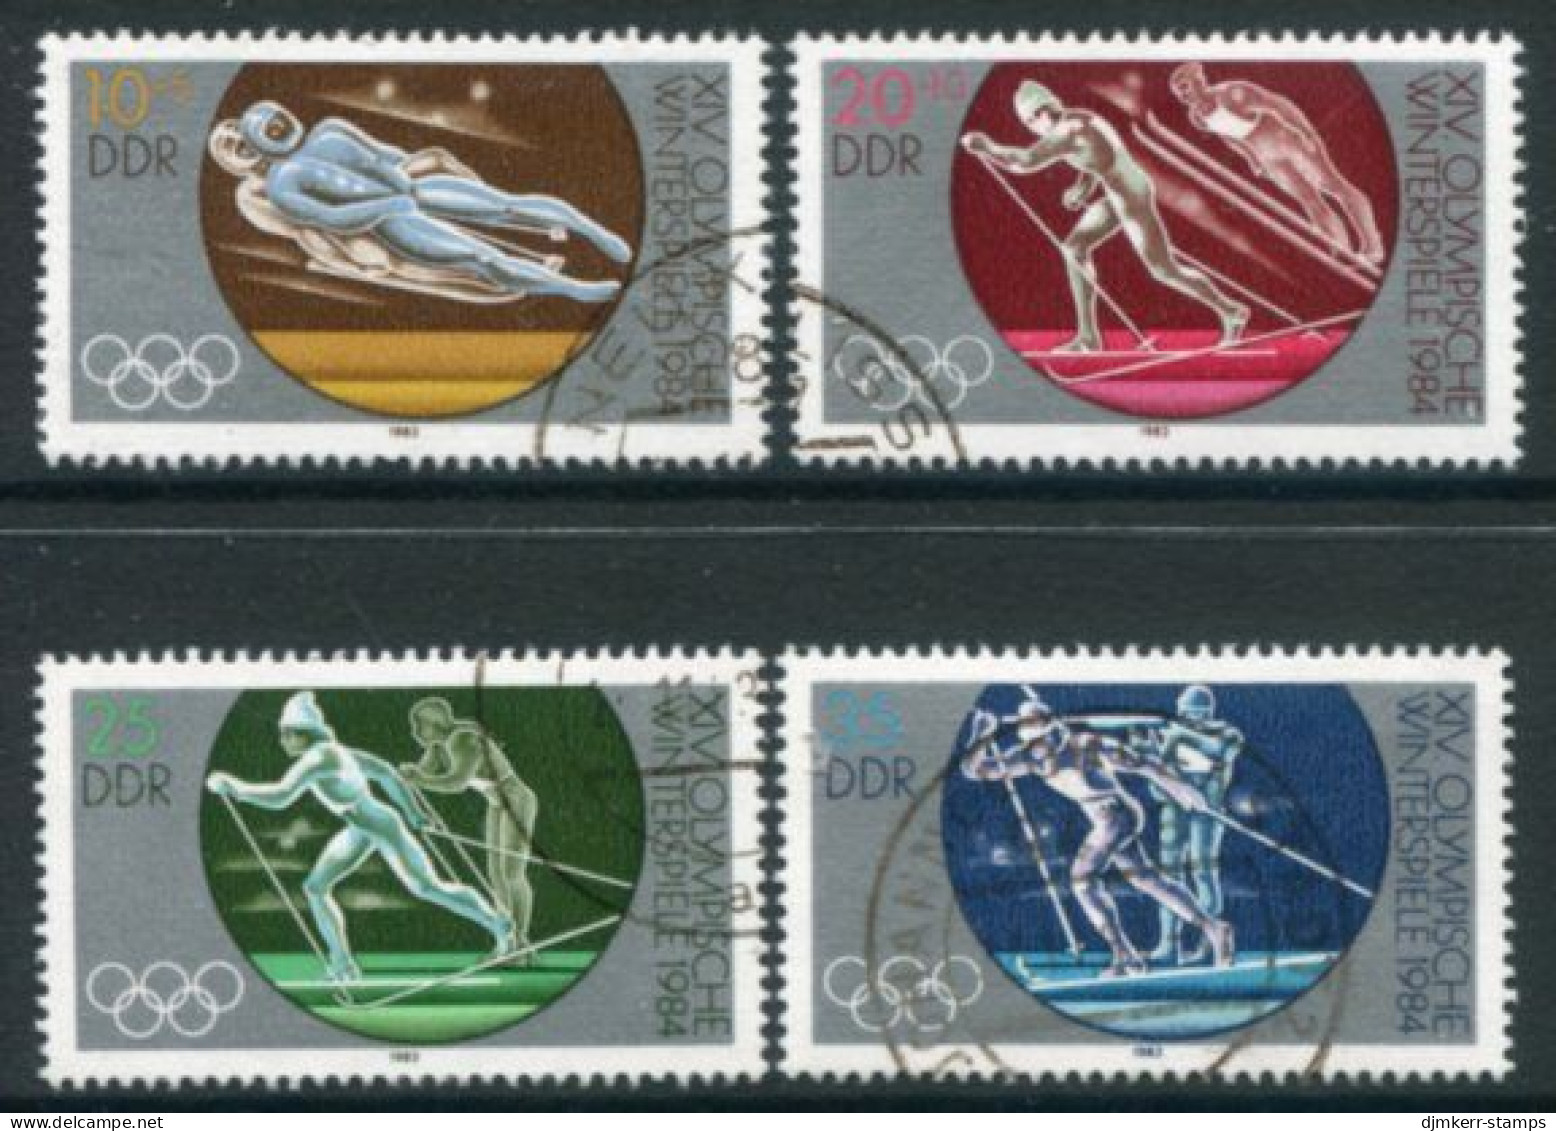 DDR 1983 Winter Olympic Games Used.  Michel 2839-42 - Usados